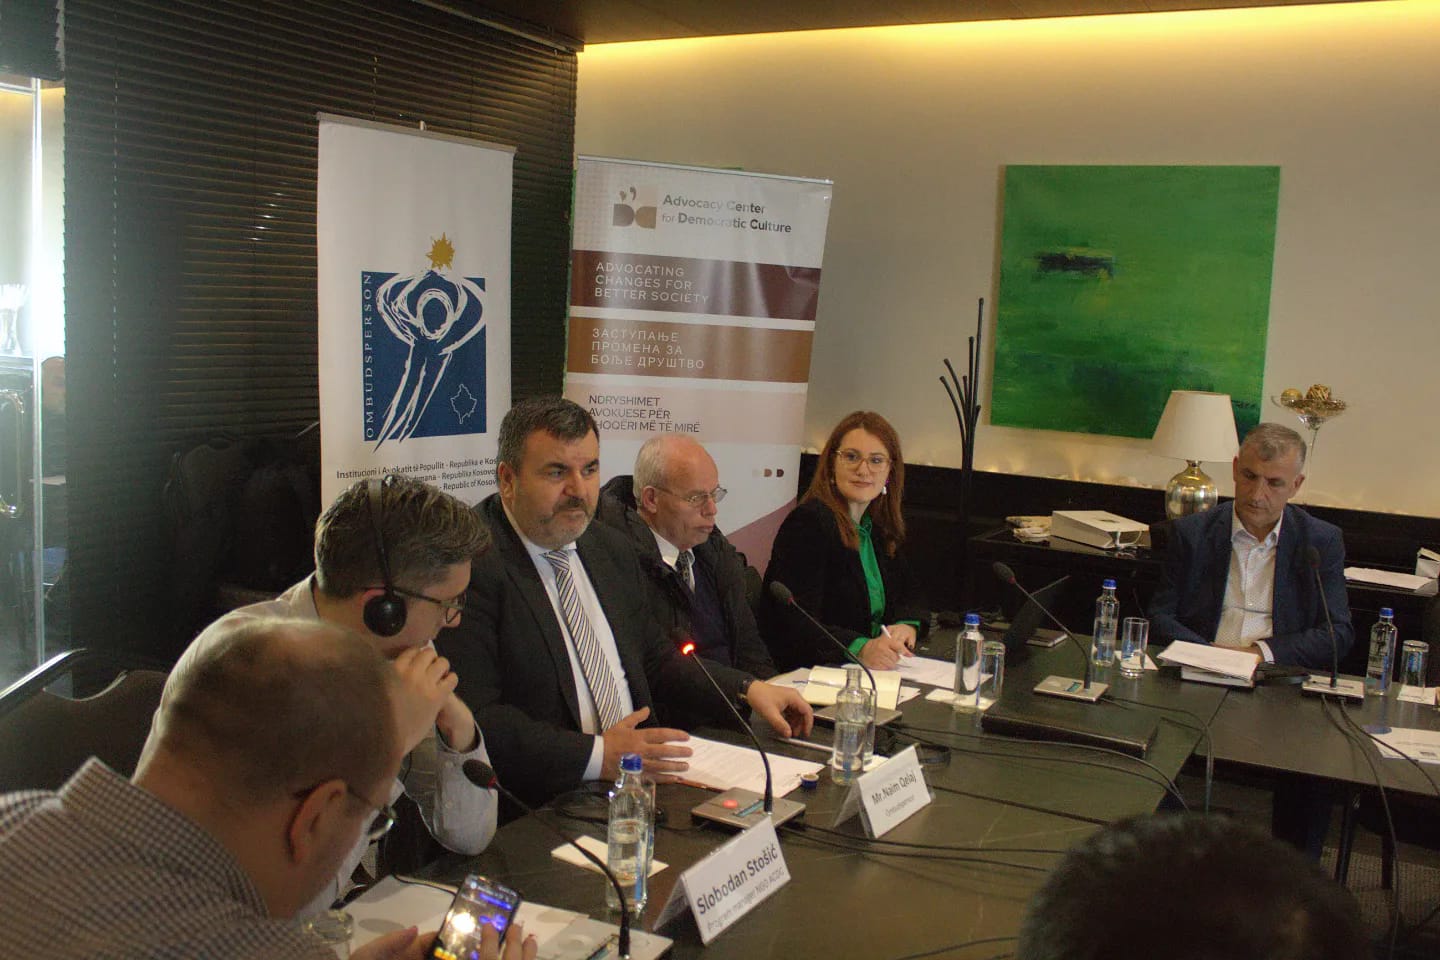 roundtable-discussion-on-human-rights-challenges-in-ferizajurosevac-region